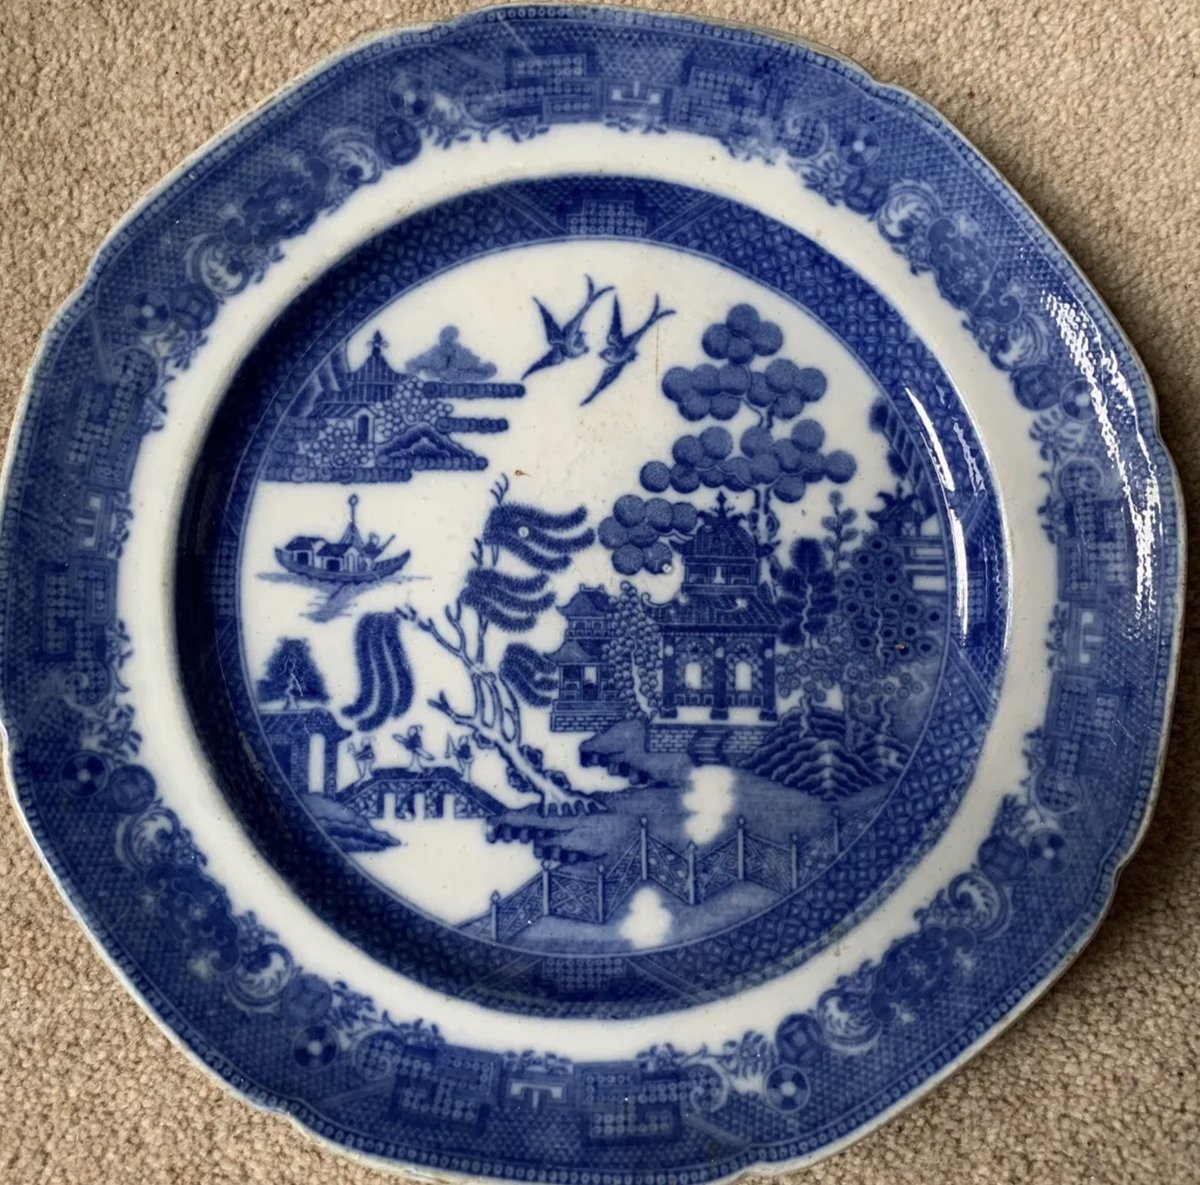 Day number 12 of my Advent calendar we have this lovely early pair of #Spode transfer printed plates  with the #Willowpattern. C. 1800. Makers single and double slashes to the rear. A similar example can be found in the V&A.